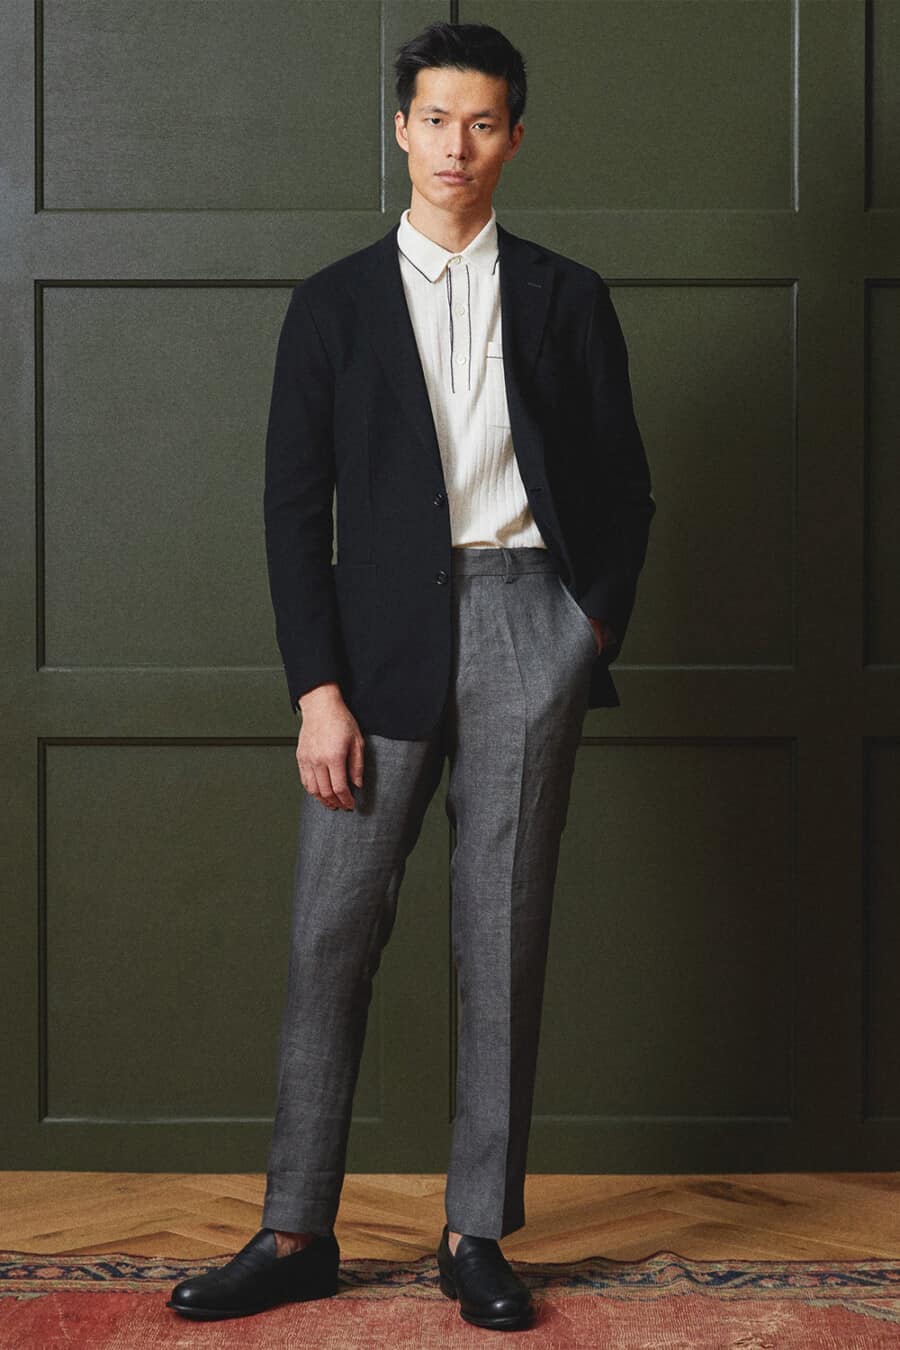 Men's tailored charcoal grey pants, white knitted polo shirt, black unstructured blazer and black leather penny loafers outfit